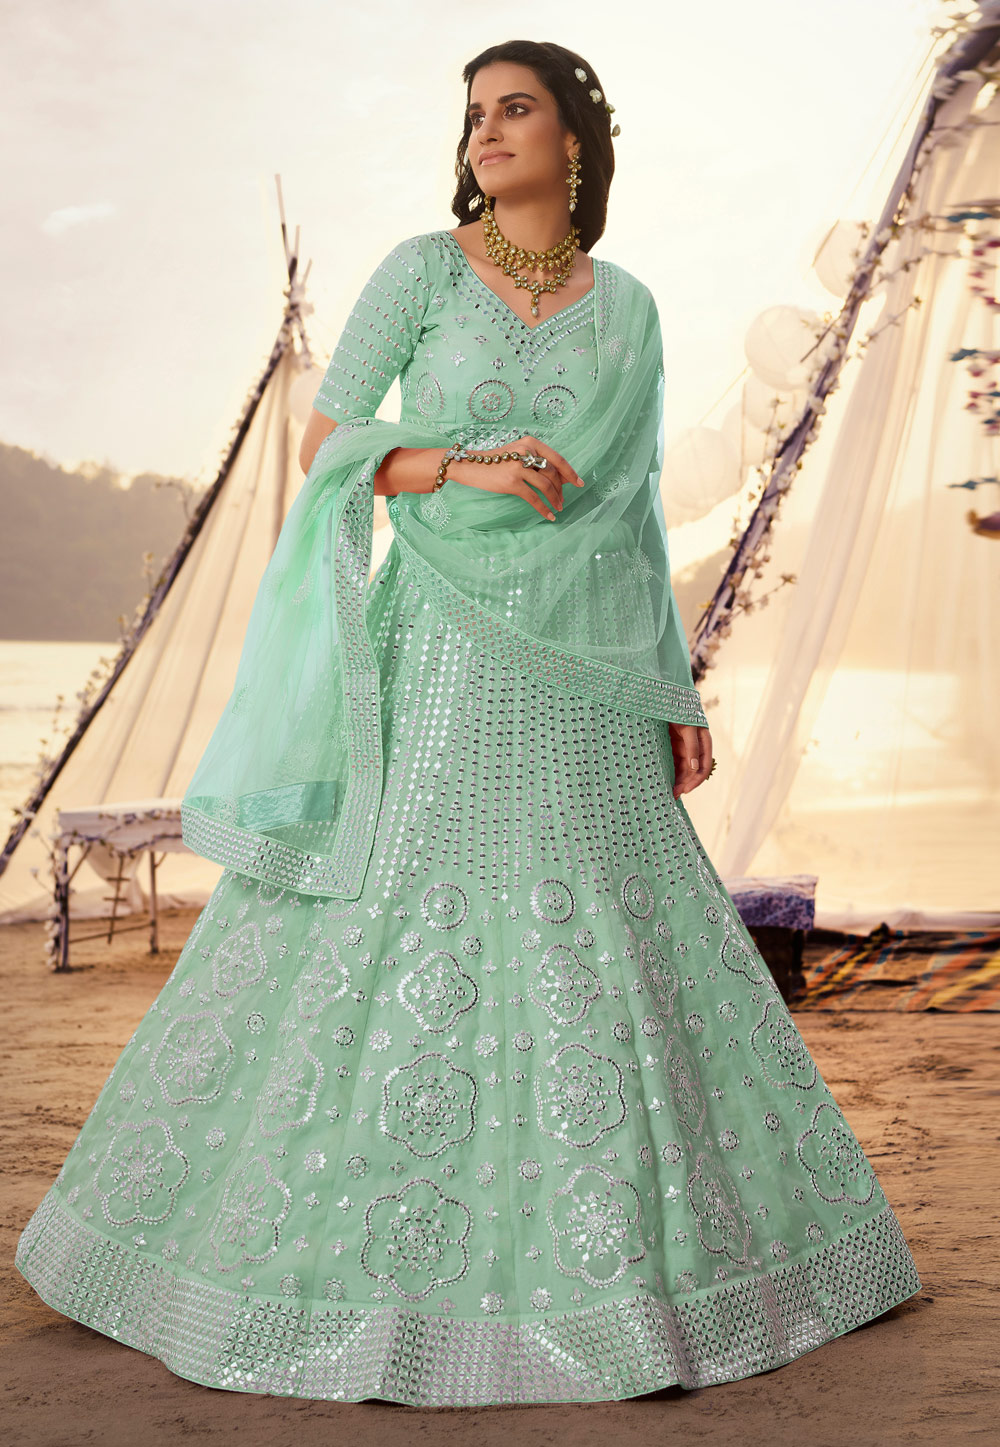 Exclusive Light Pista Green Floral Embroidered Lehenga Choli